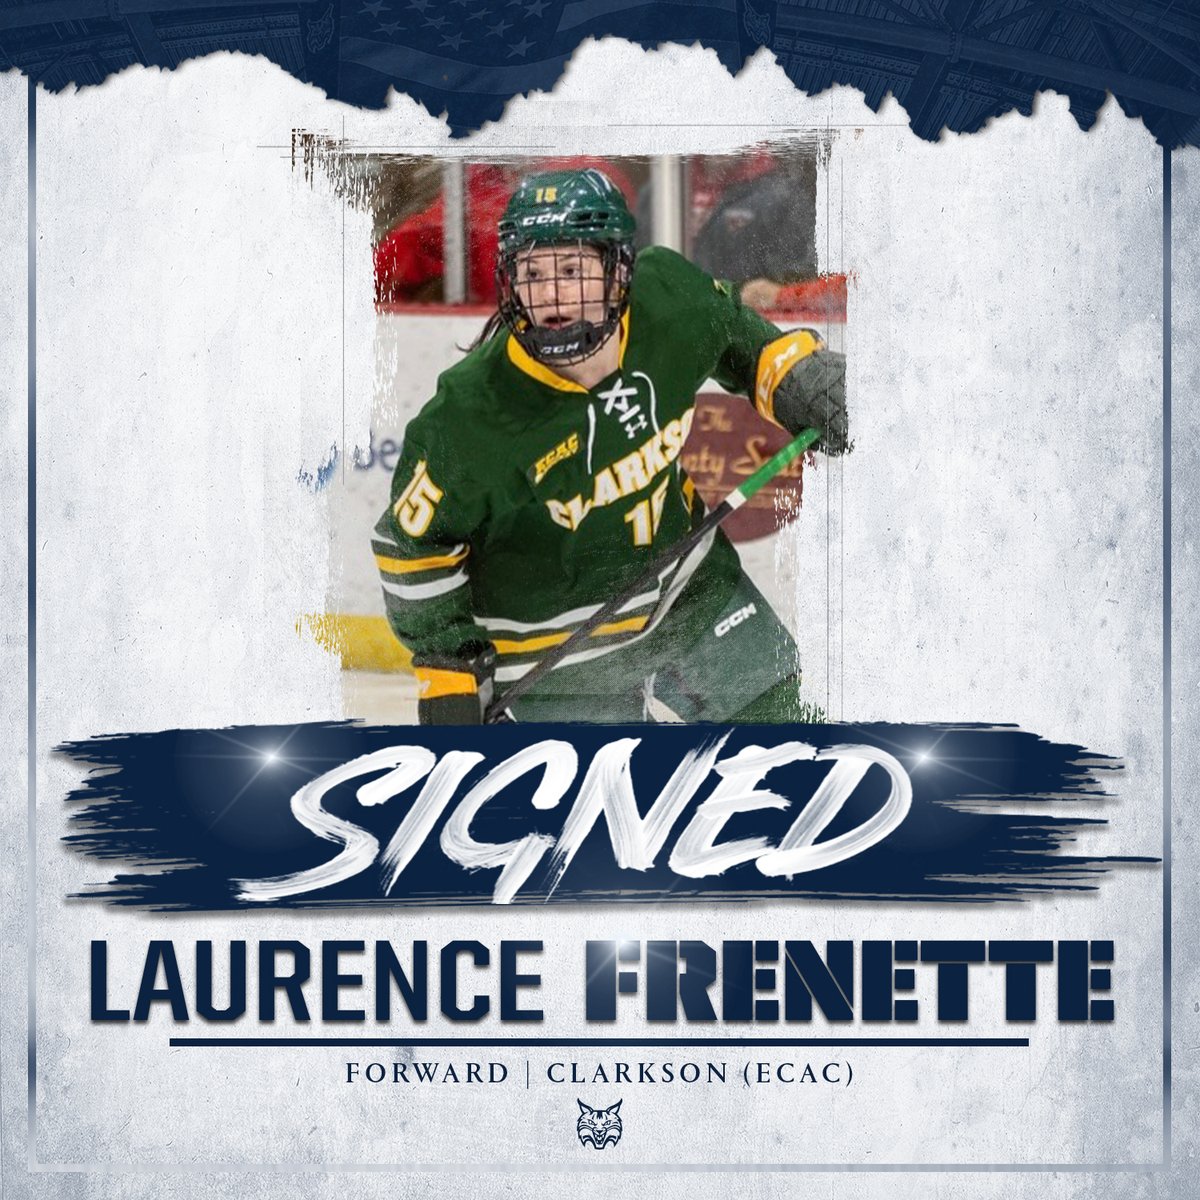 𝐒𝐈𝐆𝐍𝐄𝐃 - Laurence Frenette The former Golden Knight played 77 games at Clarkson and also was a member of Team Quebec U18 in 2019-20 along with current Bobcat Maya Labad! #BobcatNation x #NCAAHockey